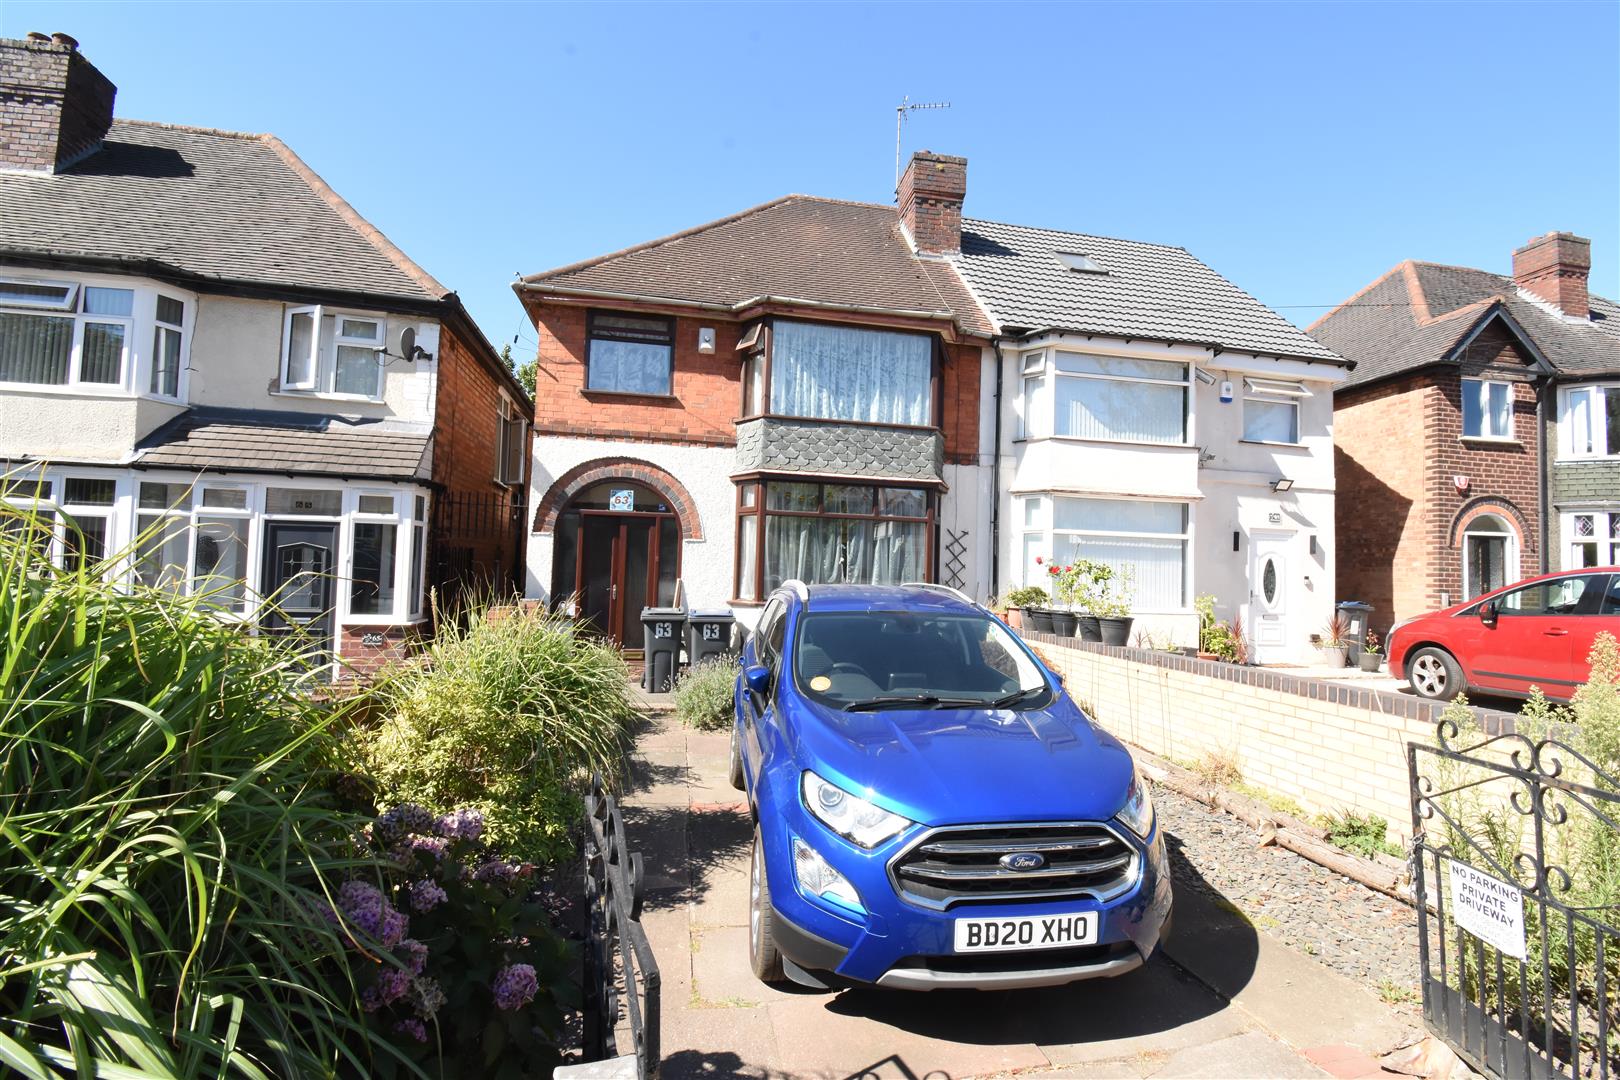 3 bed house for sale in 63 Stechford lane, Ward End, BIRMINGHAM, B8